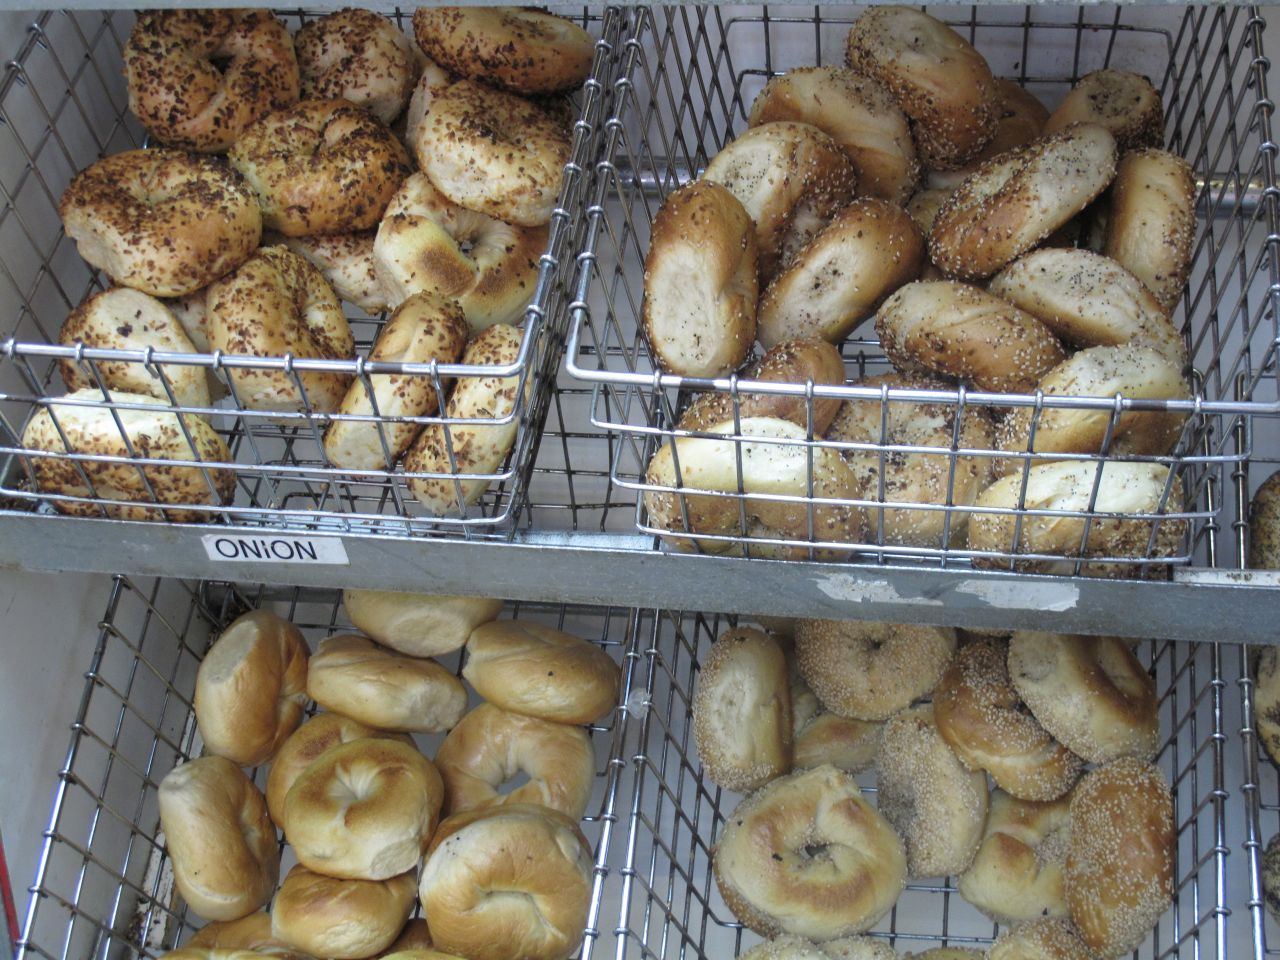 Fresh-baked bialys from Coney Island Bialys and Bagels.